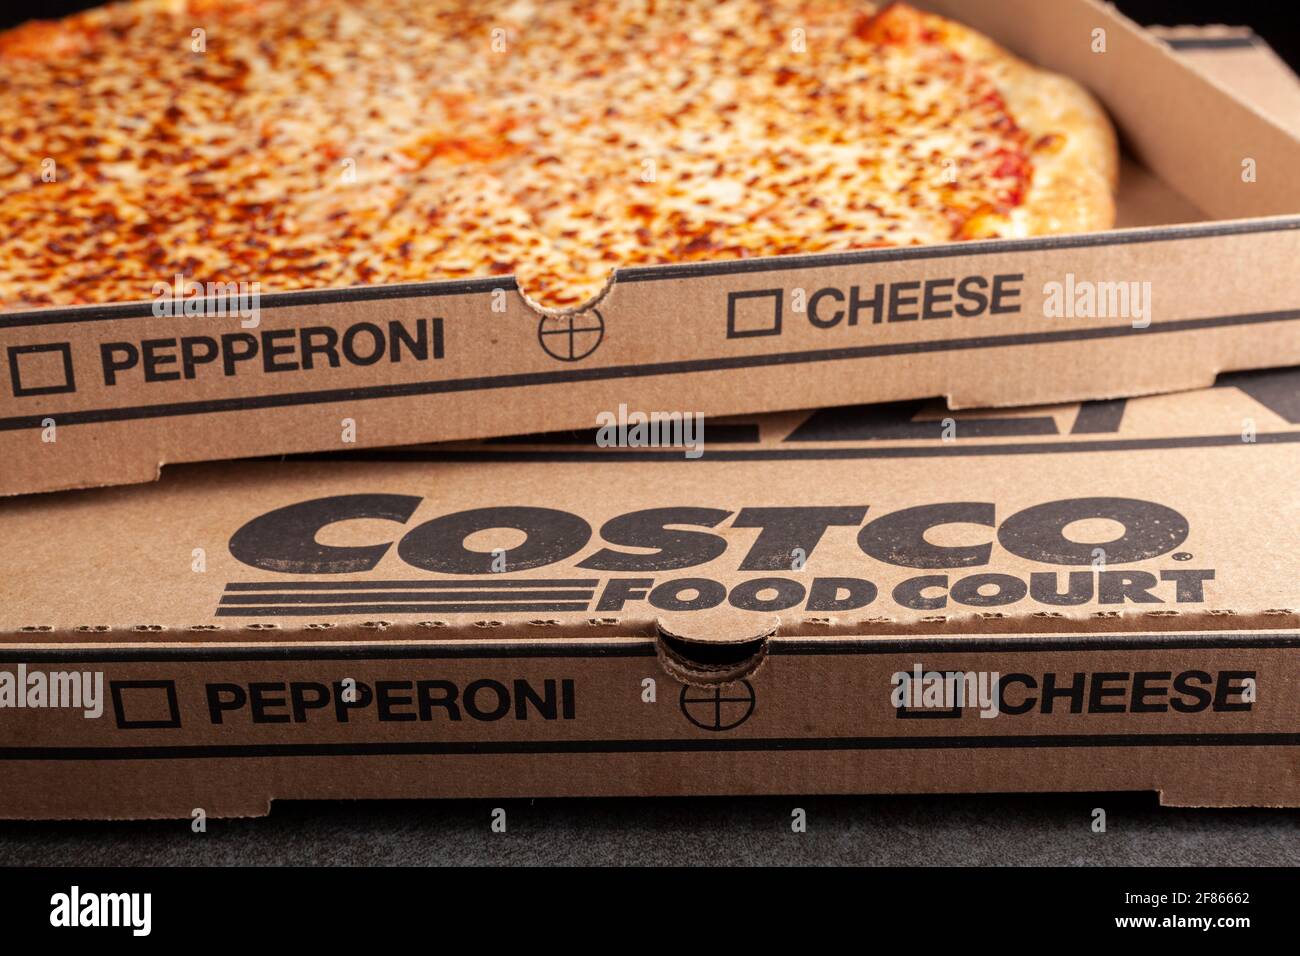 Clarksburg, MD, USA 04-7-2021: Closeup angled image of a carton box of delicious made to order COSTCO cheese pizza. Very popular bargain priced food c Stock Photo